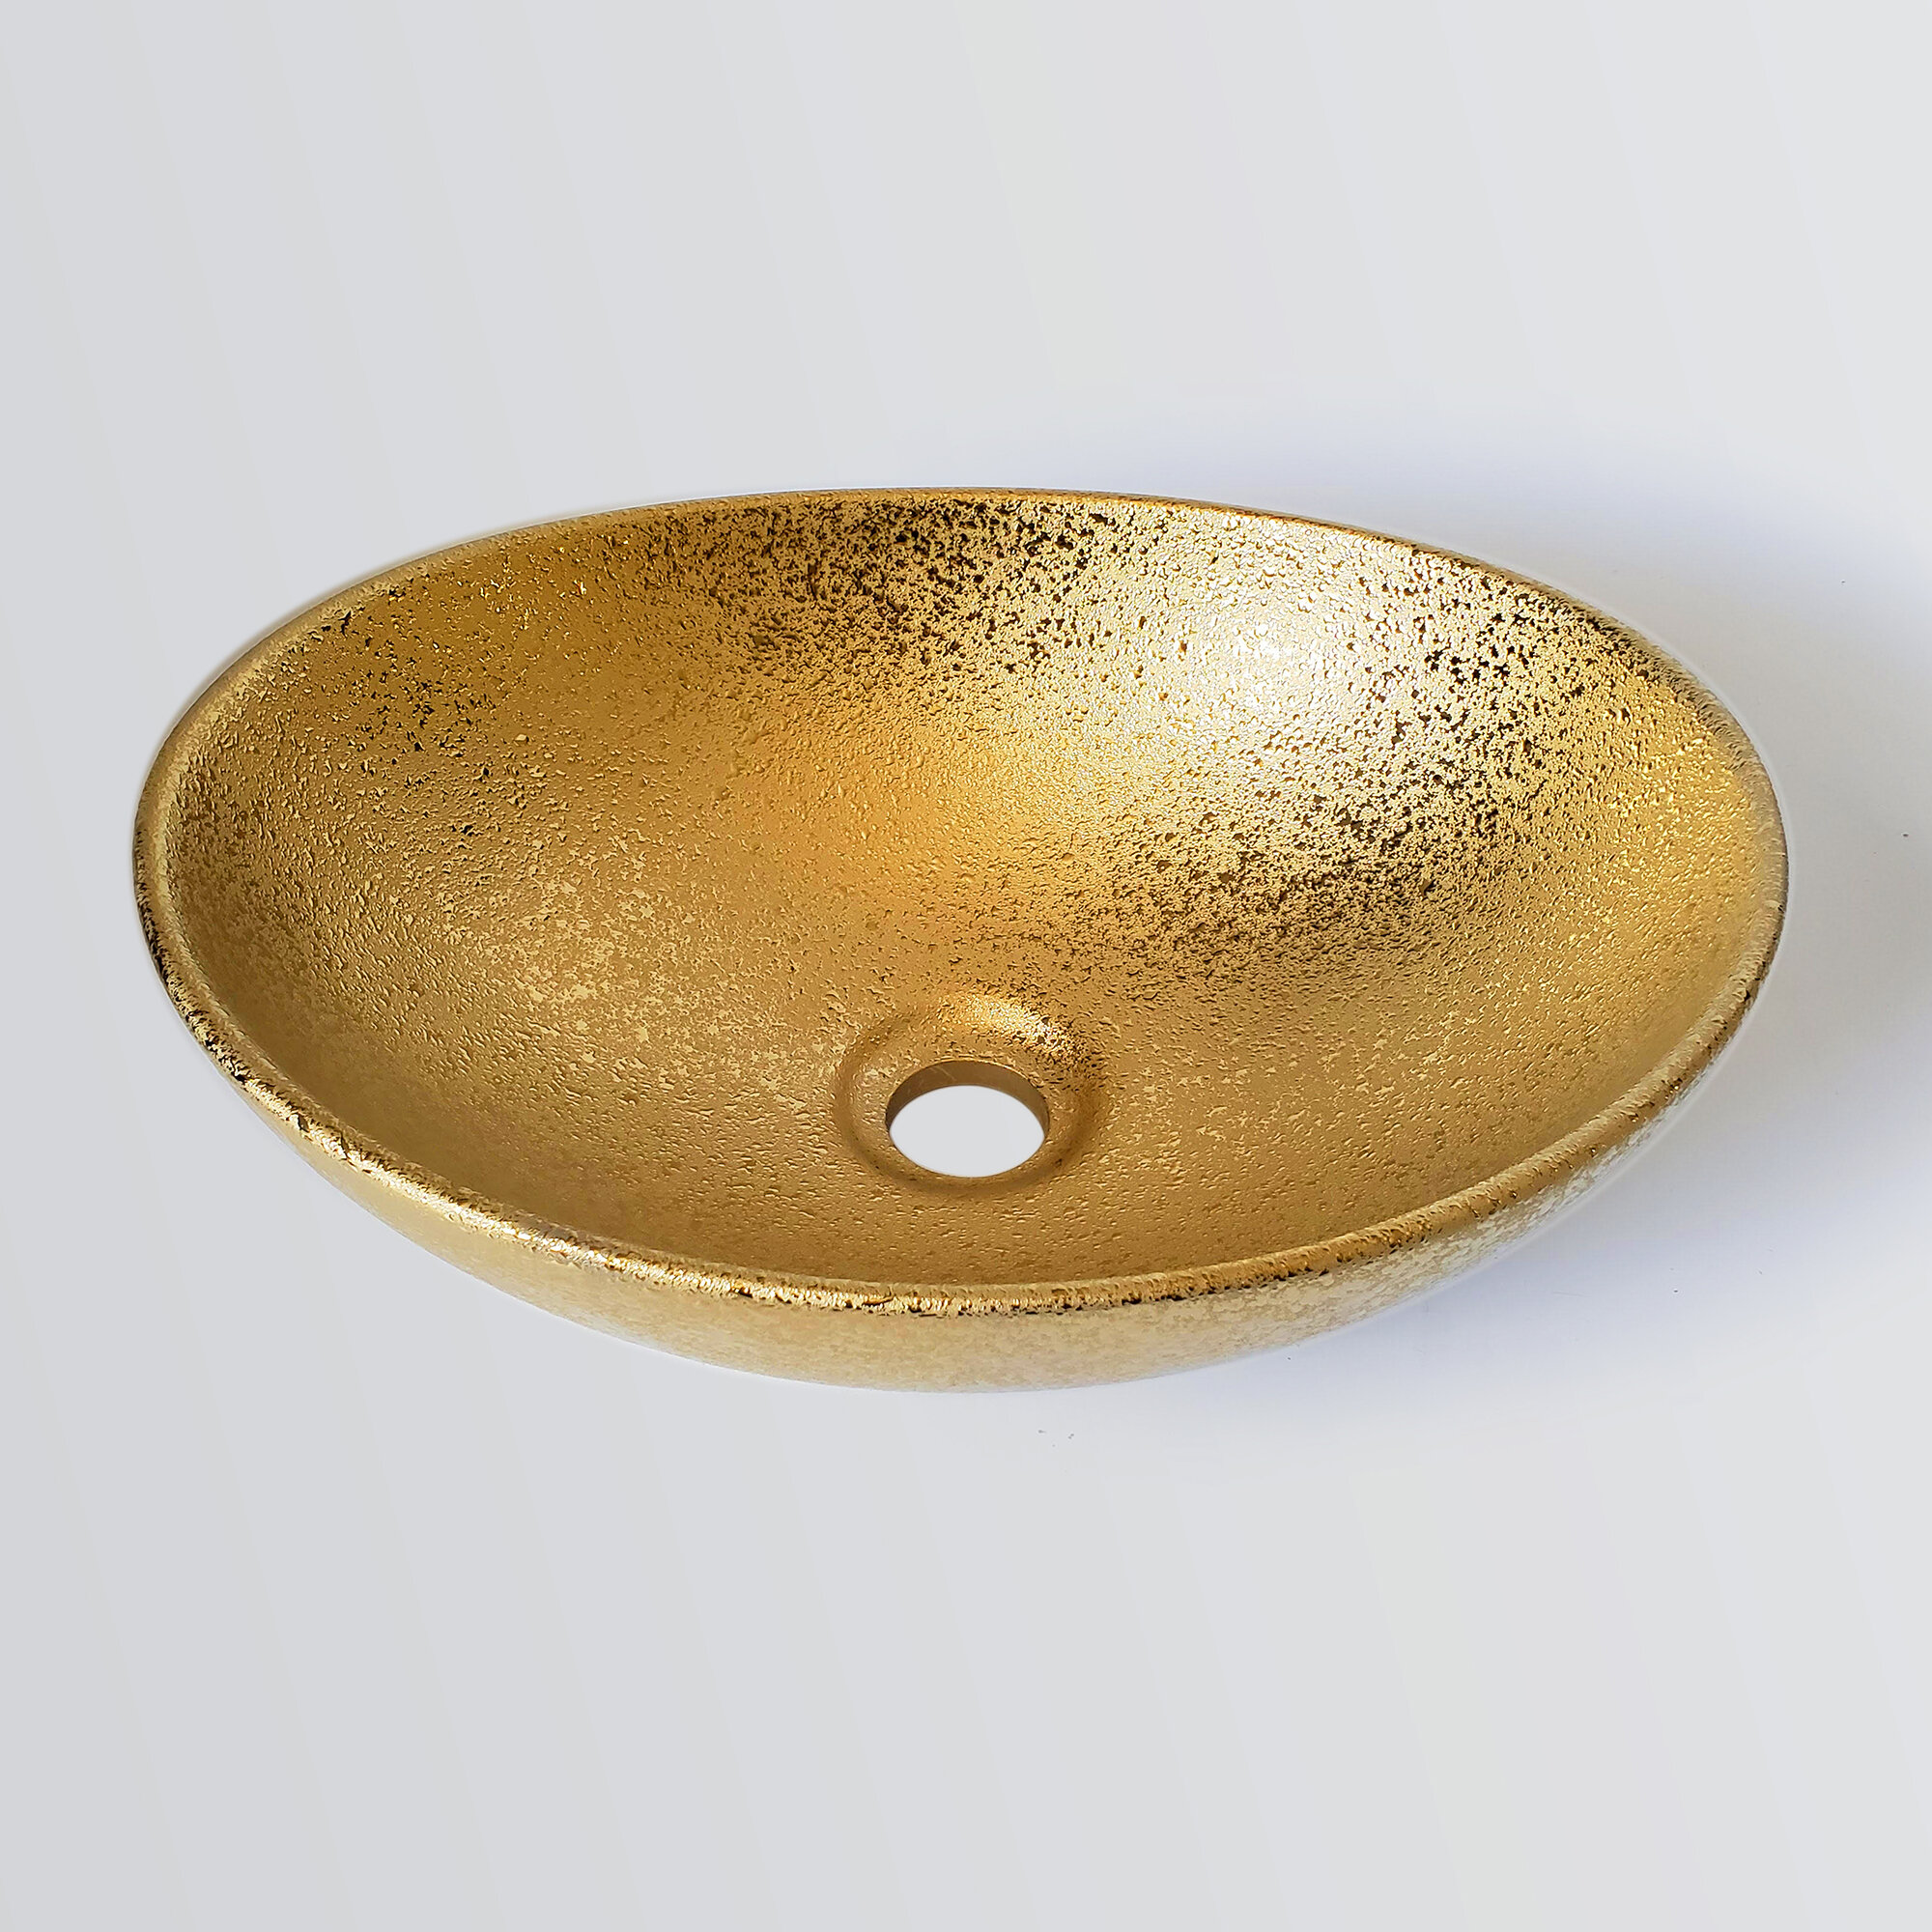 Oval Gold Ceramic Basin Bathroom Sinks W/ Gold Brass Mixer Faucet Tap Drain Sets